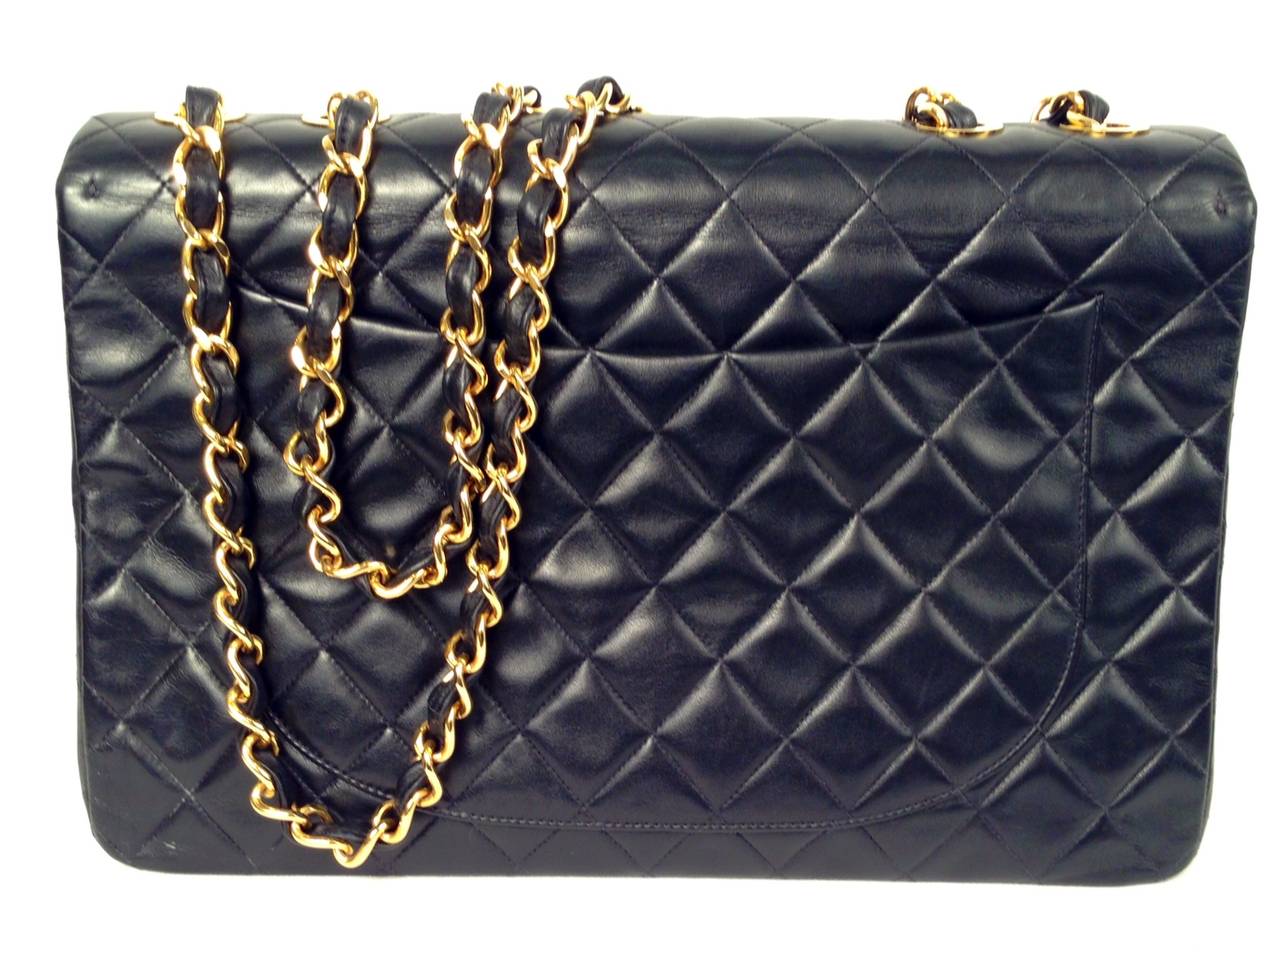 Calling all supermodels! Mid-1990's Maxi Classic Quilted Single Flap Bag is no longer available in boutiques. A stunning bag that is hard to find, the Maxi Classic is highly desired by collector's worldwide. Features include signature lambskin